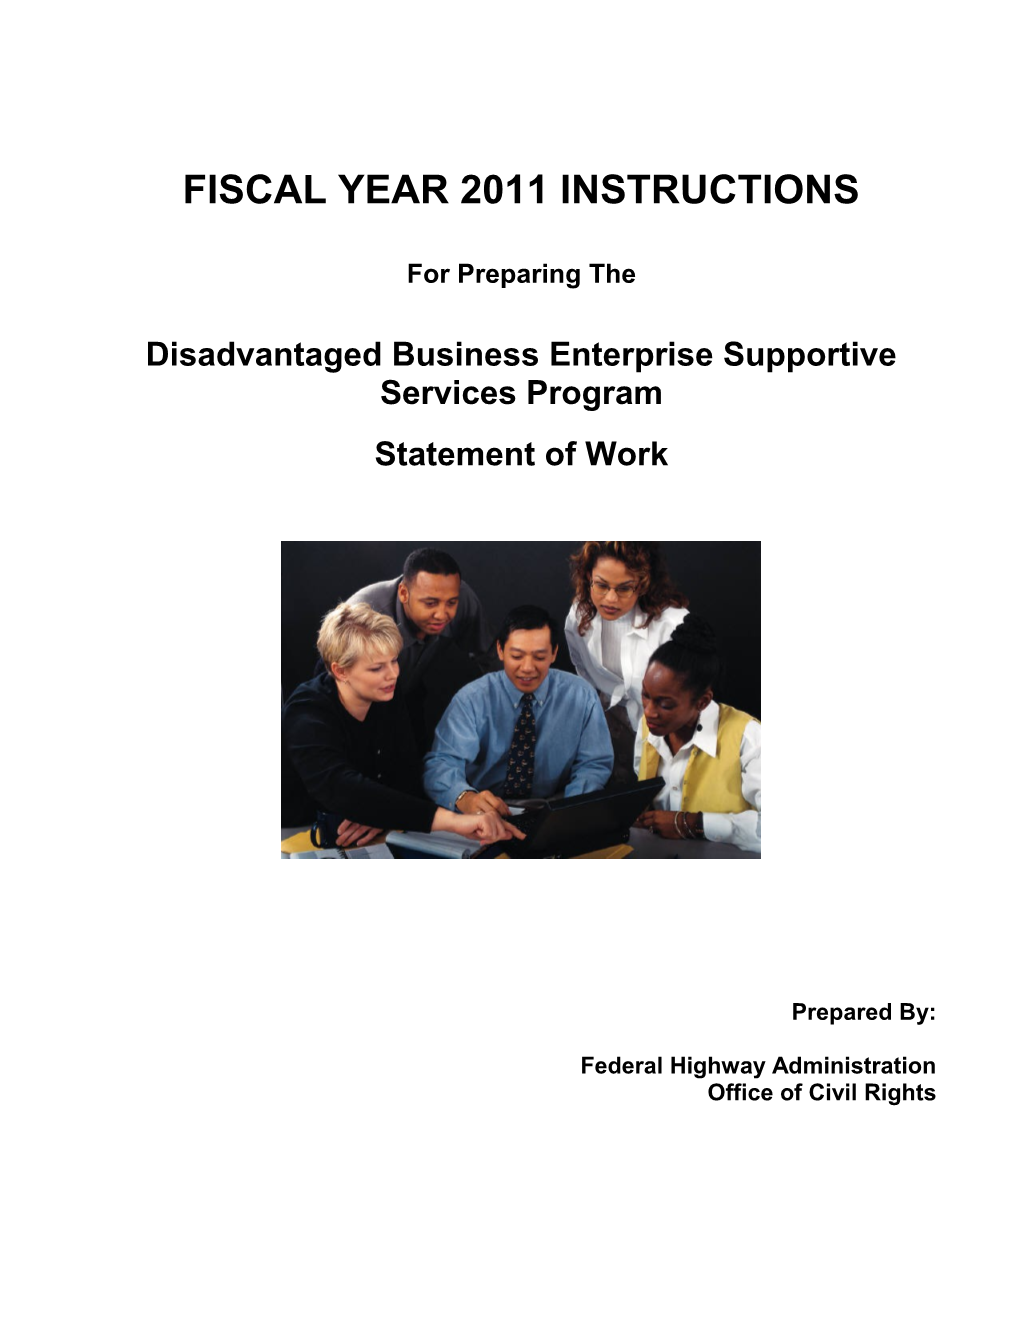 Fiscal Year 2010 Instructions